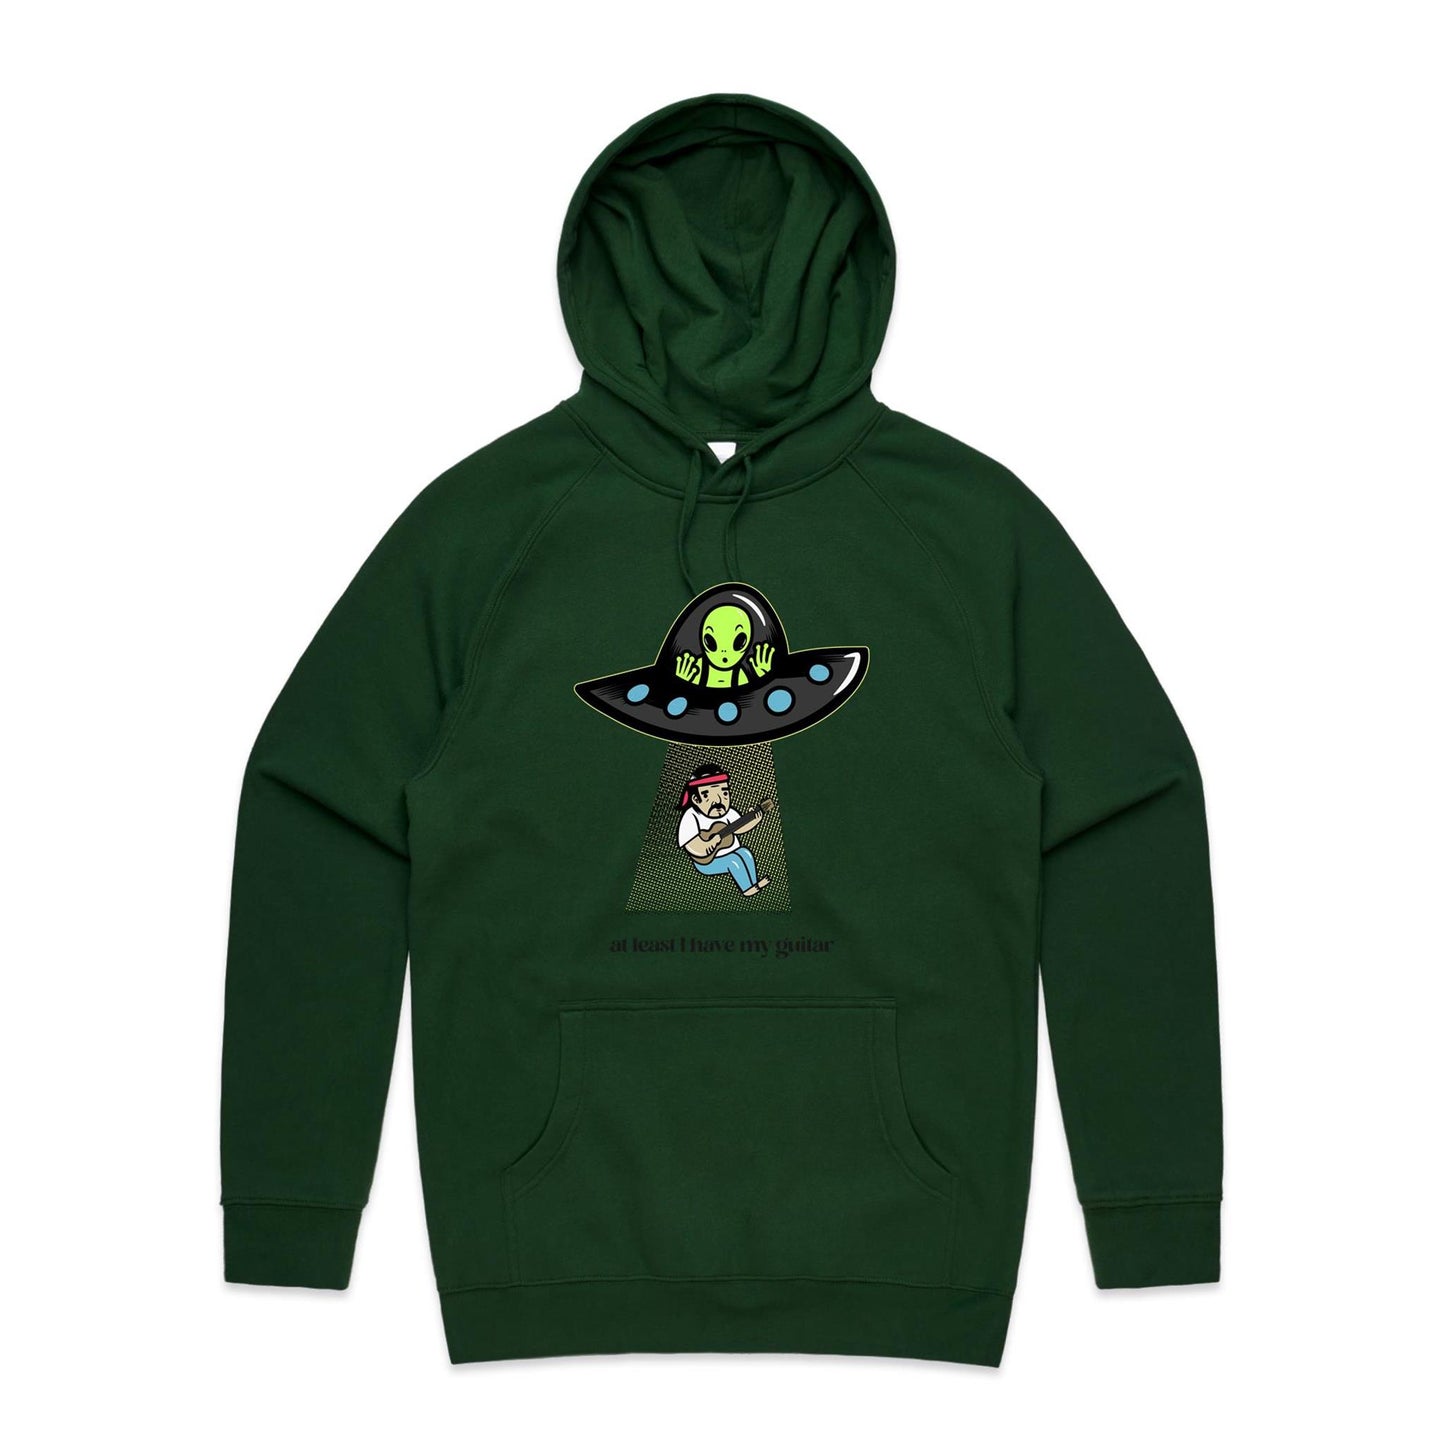 Guitarist Alien Abduction - Supply Hood Forest Green Mens Supply Hoodie Music Sci Fi